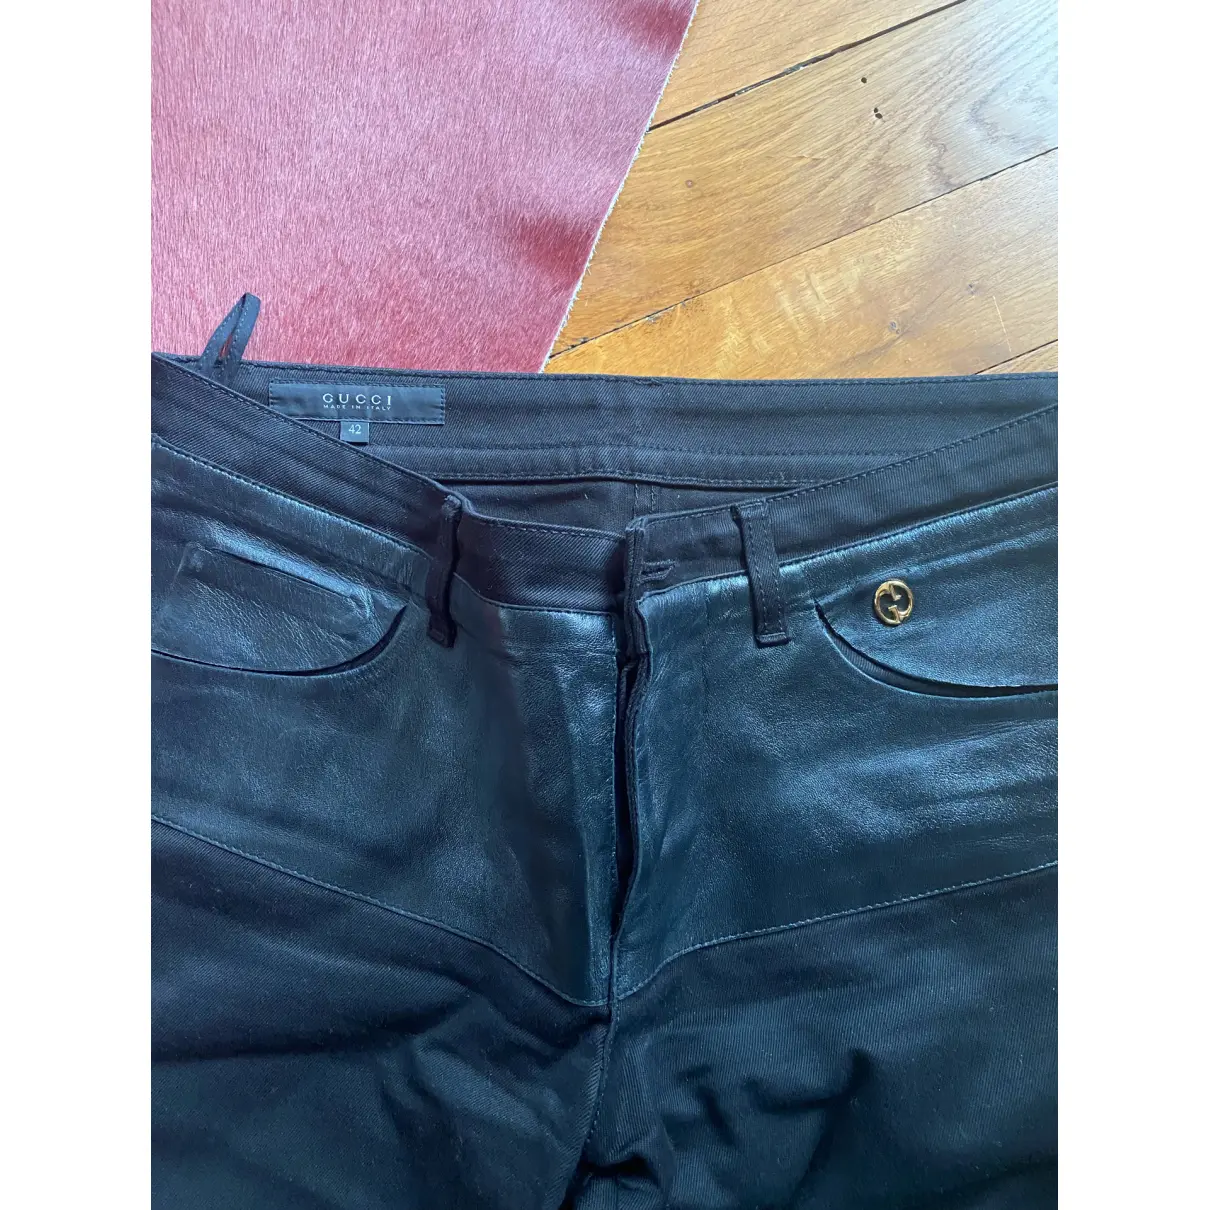 Buy Gucci Leather straight pants online